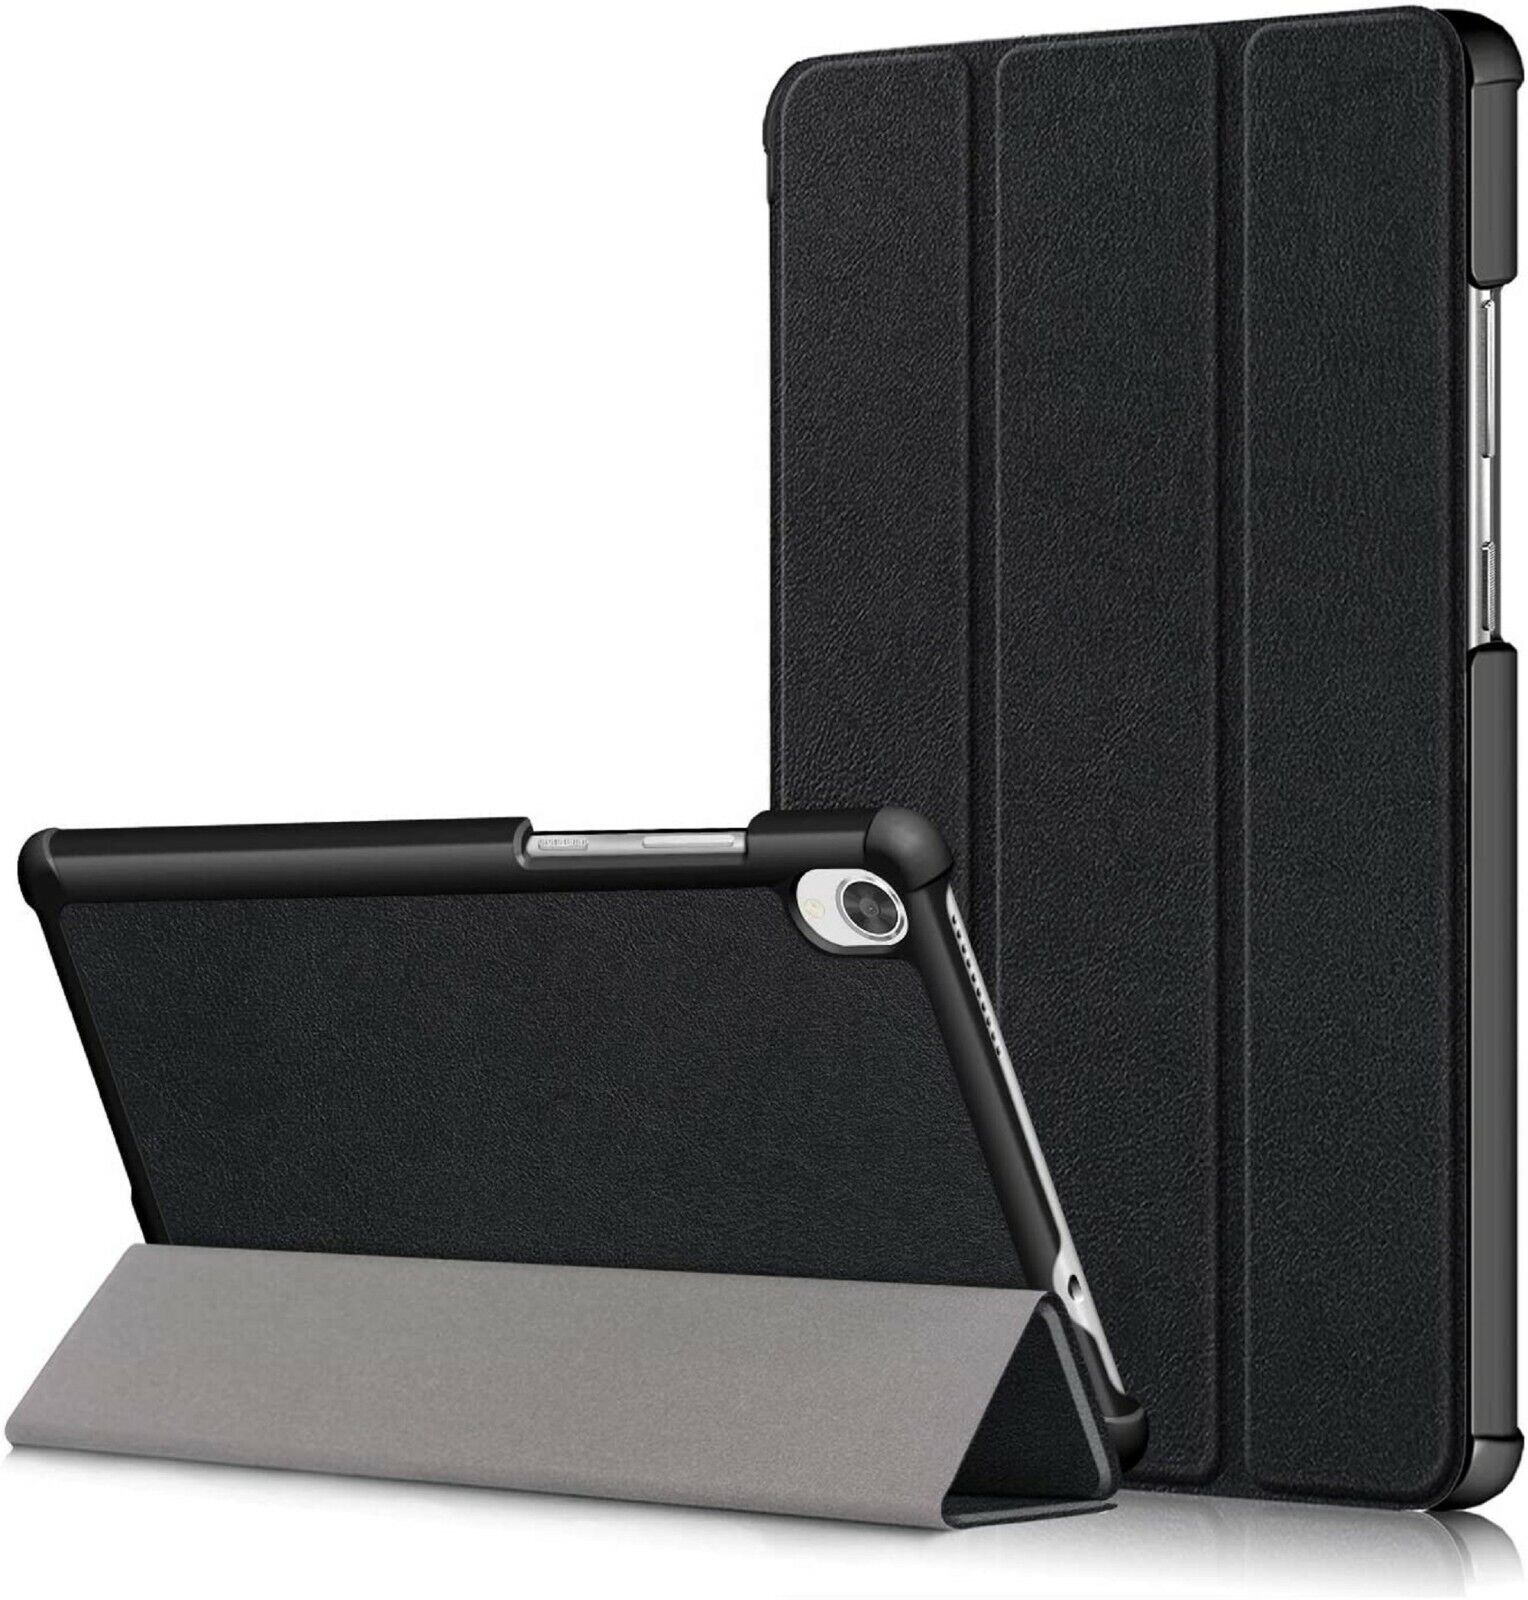 Case For Lenovo Tab M8 (3rd Gen) / Tab M8 HD LTE / Tab M8 FHD 8 inch Stand Cover